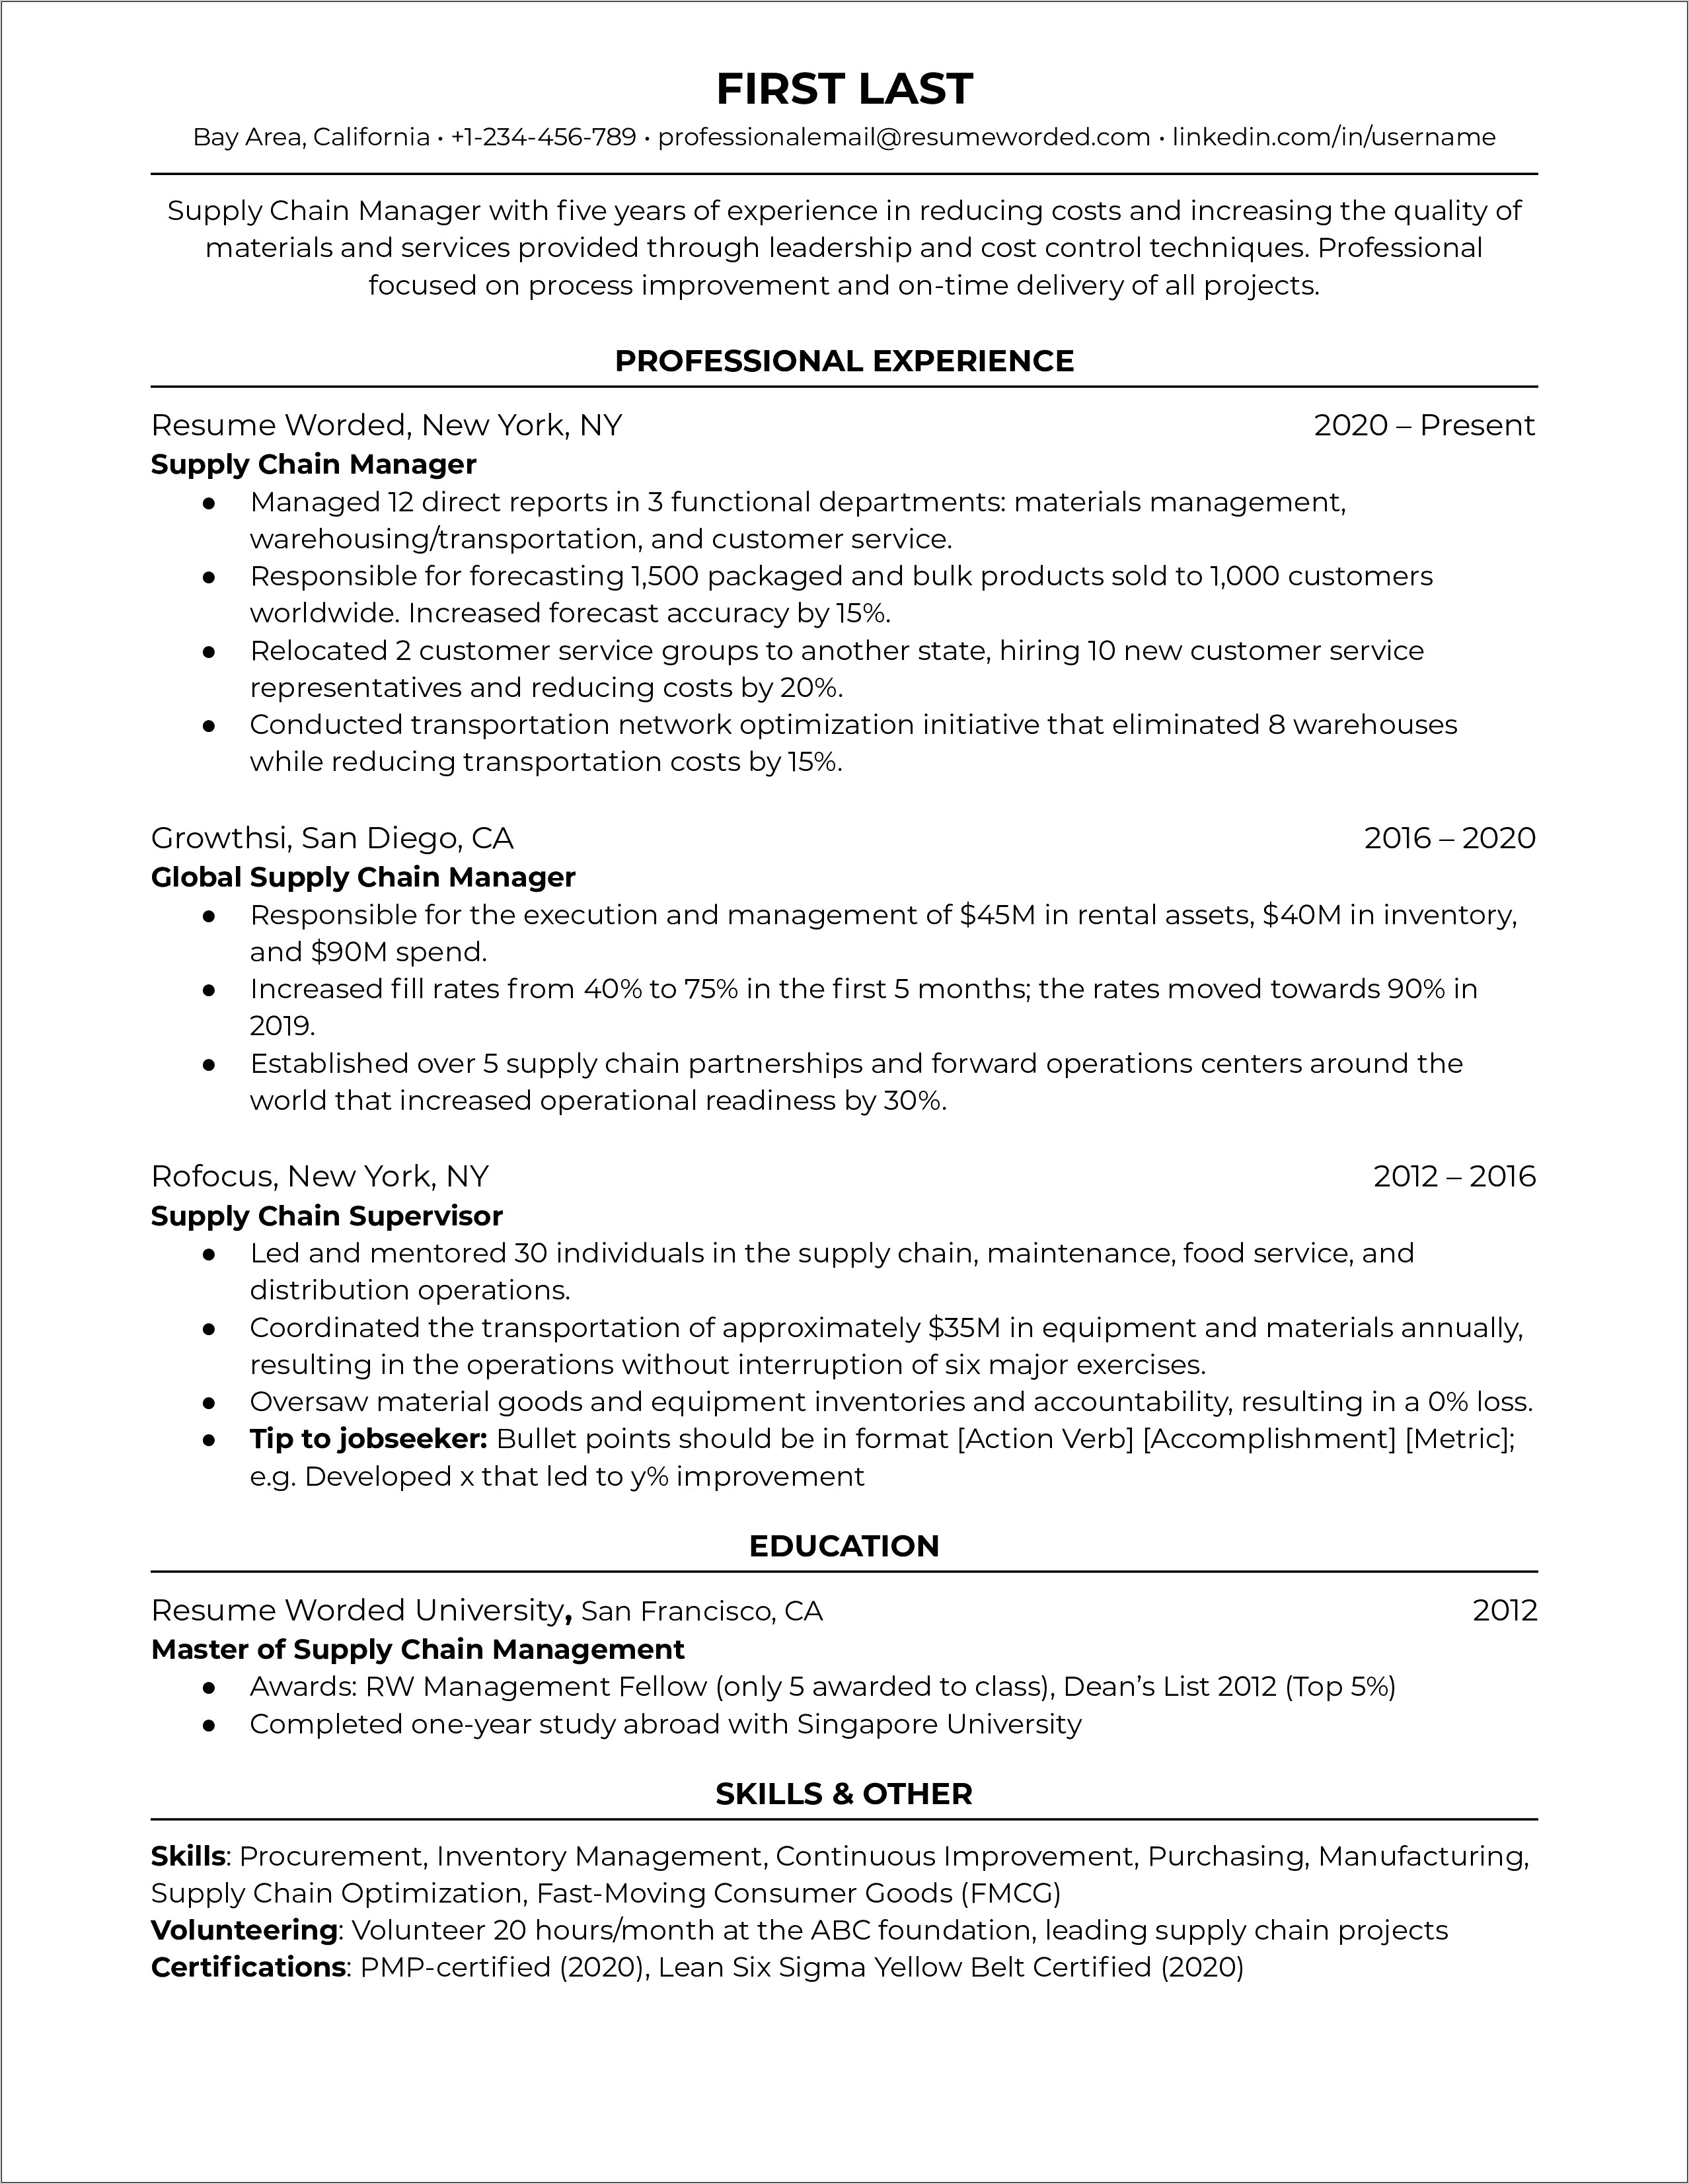 A Good Resume Summary For Supply Chain